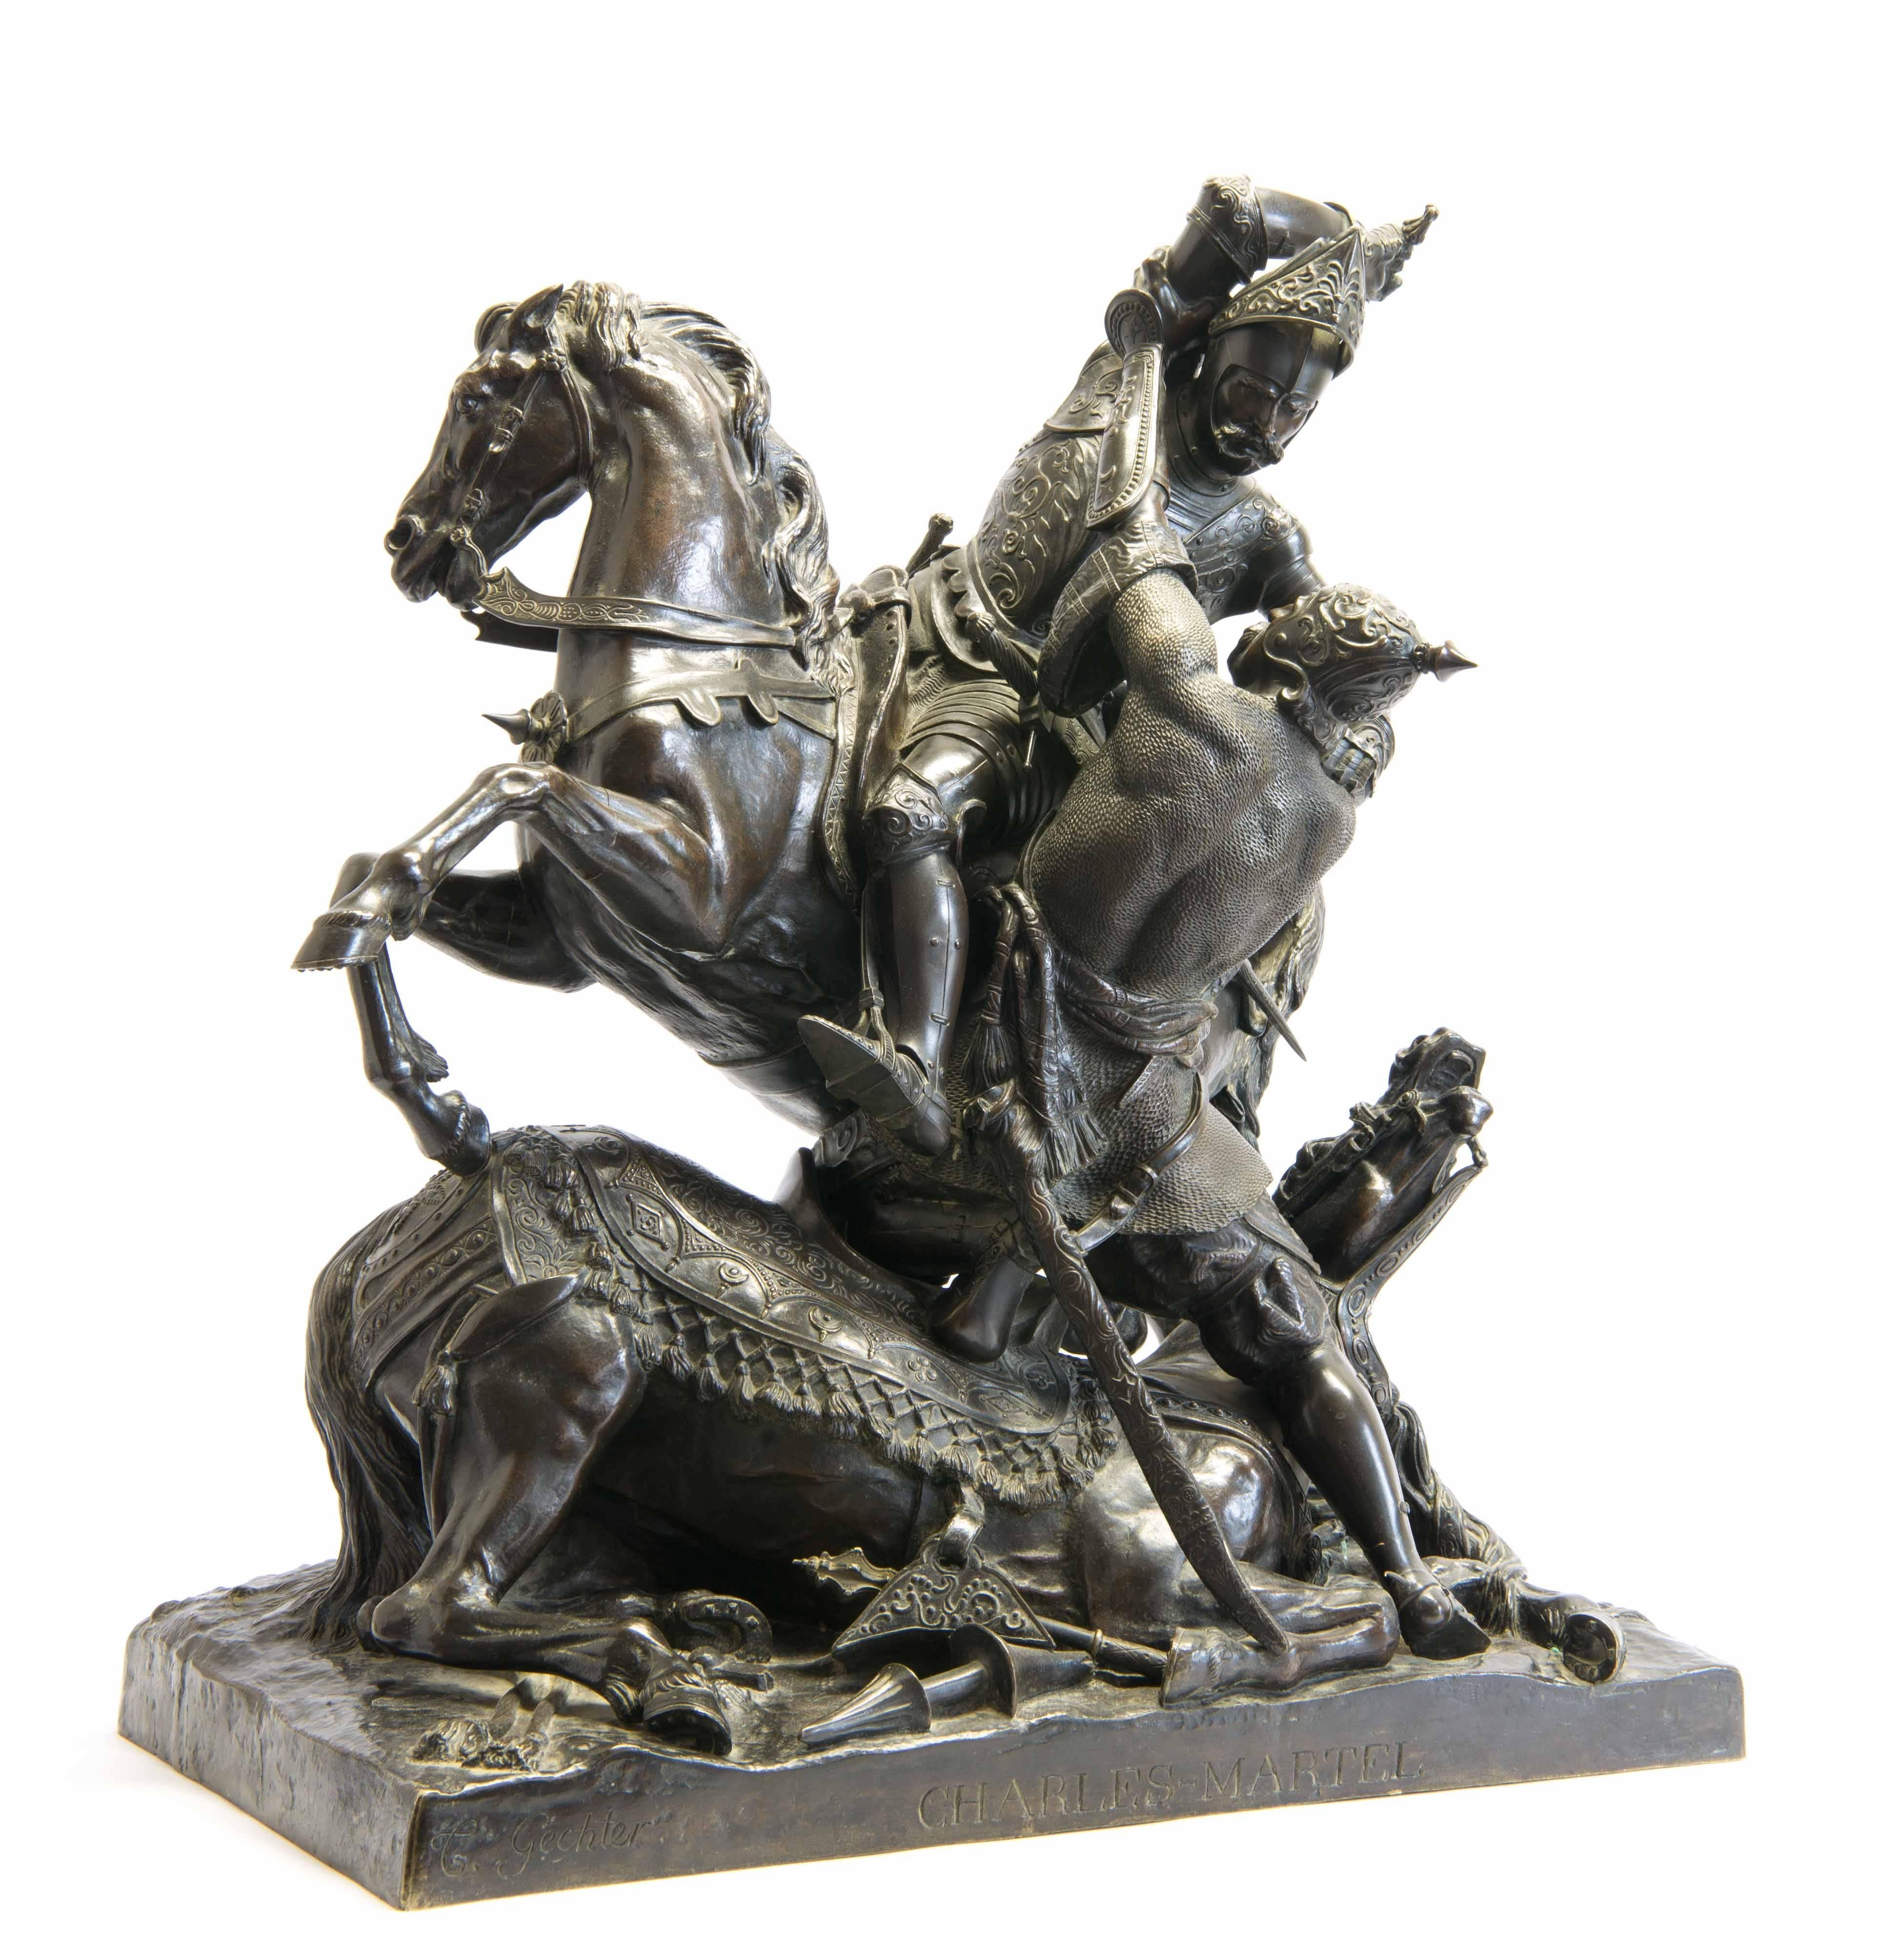 Bronze statue by Jean Francois Theodore Gechter (°1796-1844)

Battle of Charles Martel and Abdérame (Abdul Rahman) during the Battle for Tours/Poitiers (°732). The battle for Poitiers is described as one of the most important battles in human